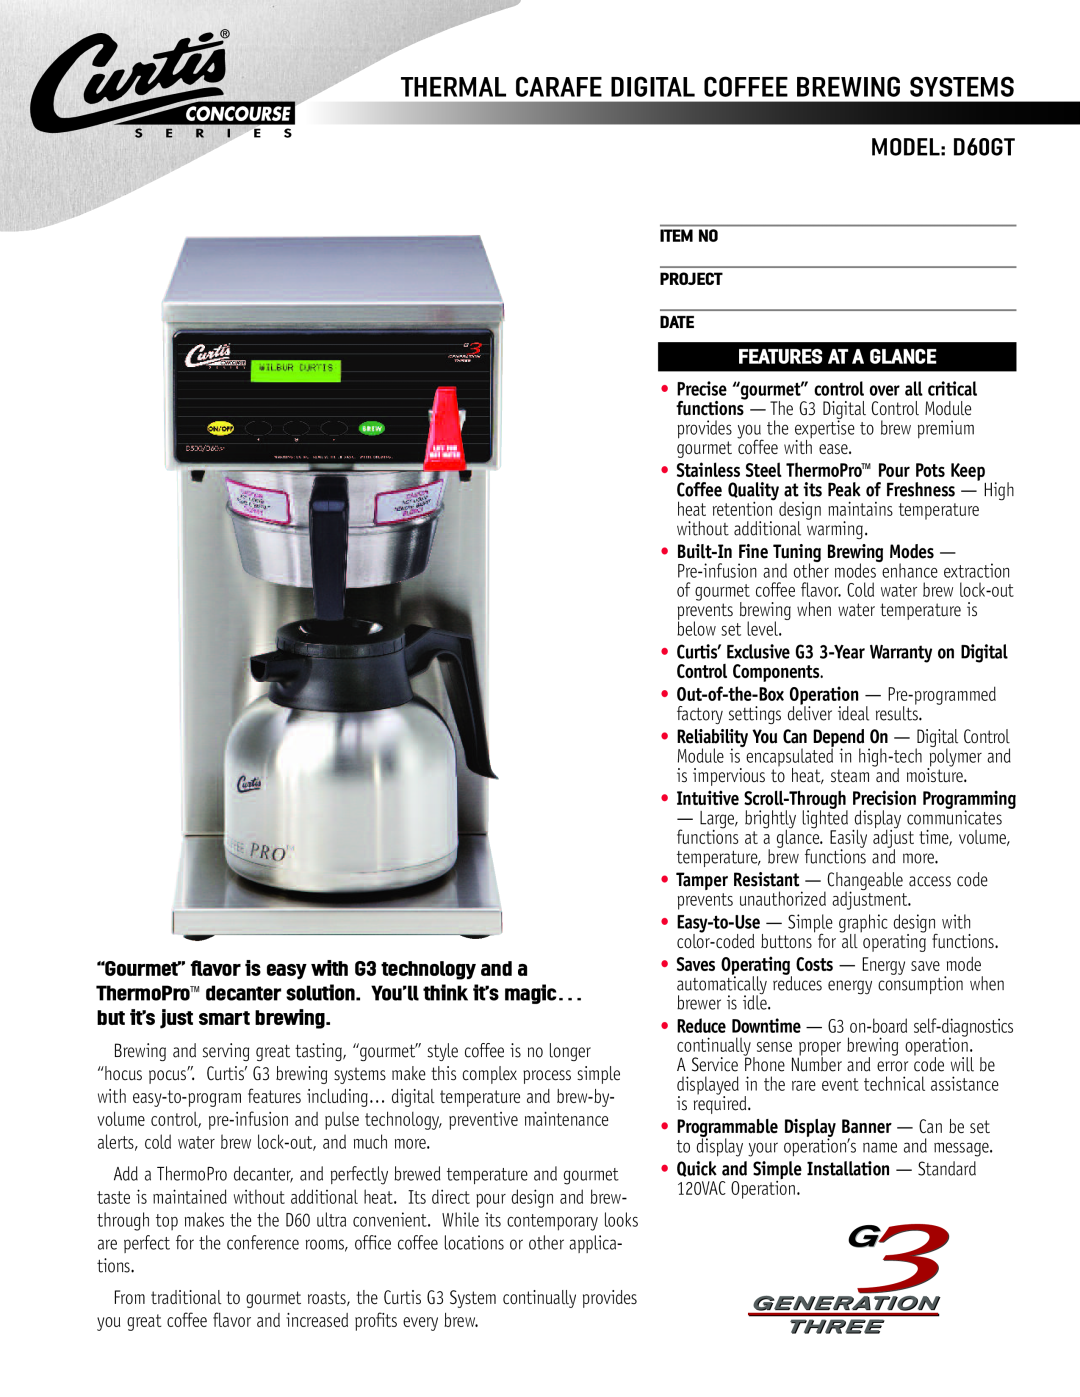 Curtis warranty MODEL D60GT, Thermal Carafe Digital Coffee Brewing Systems, Features At A Glance 